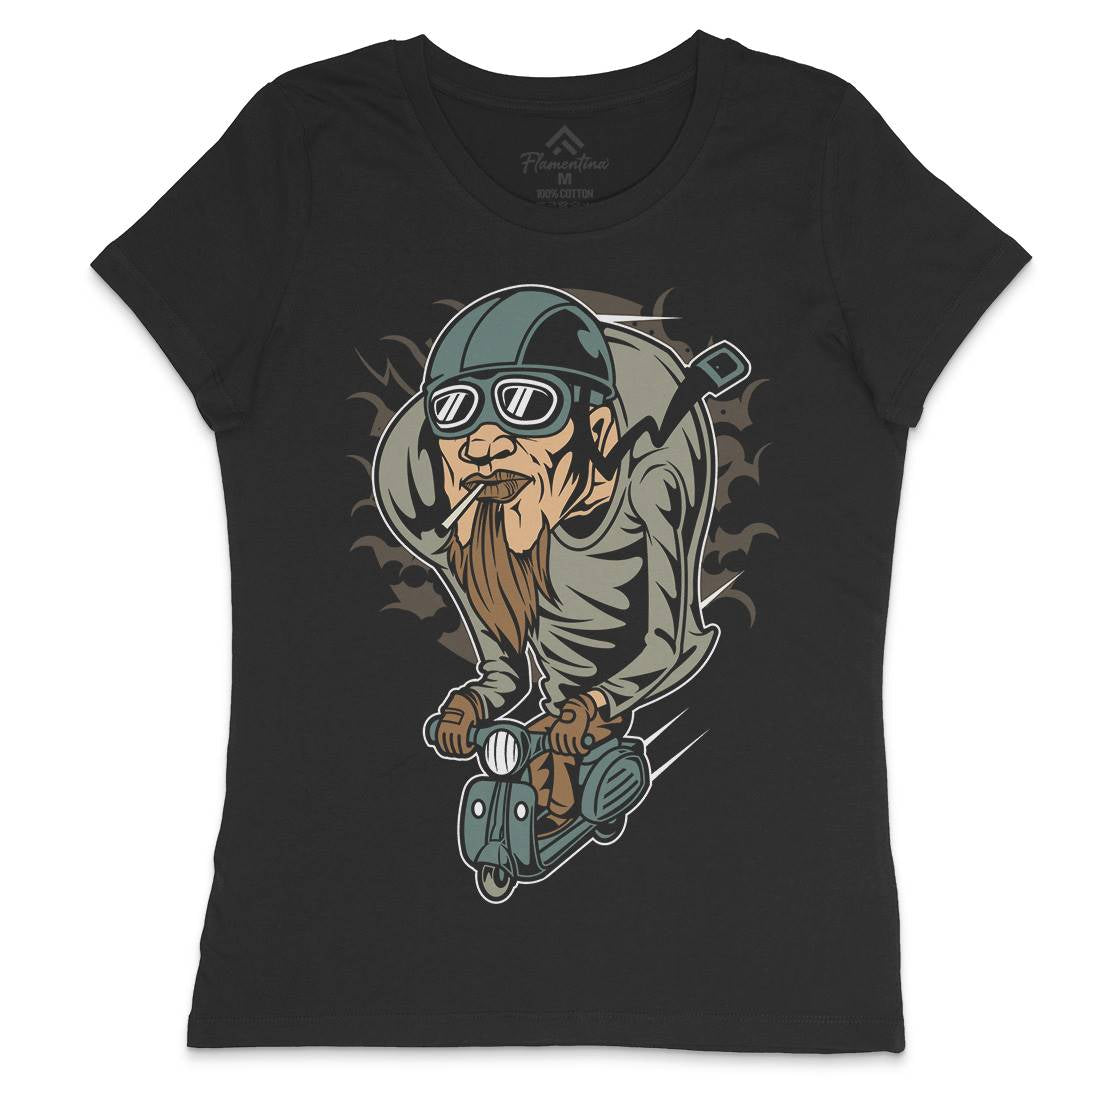 Scooter Man Womens Crew Neck T-Shirt Motorcycles C437